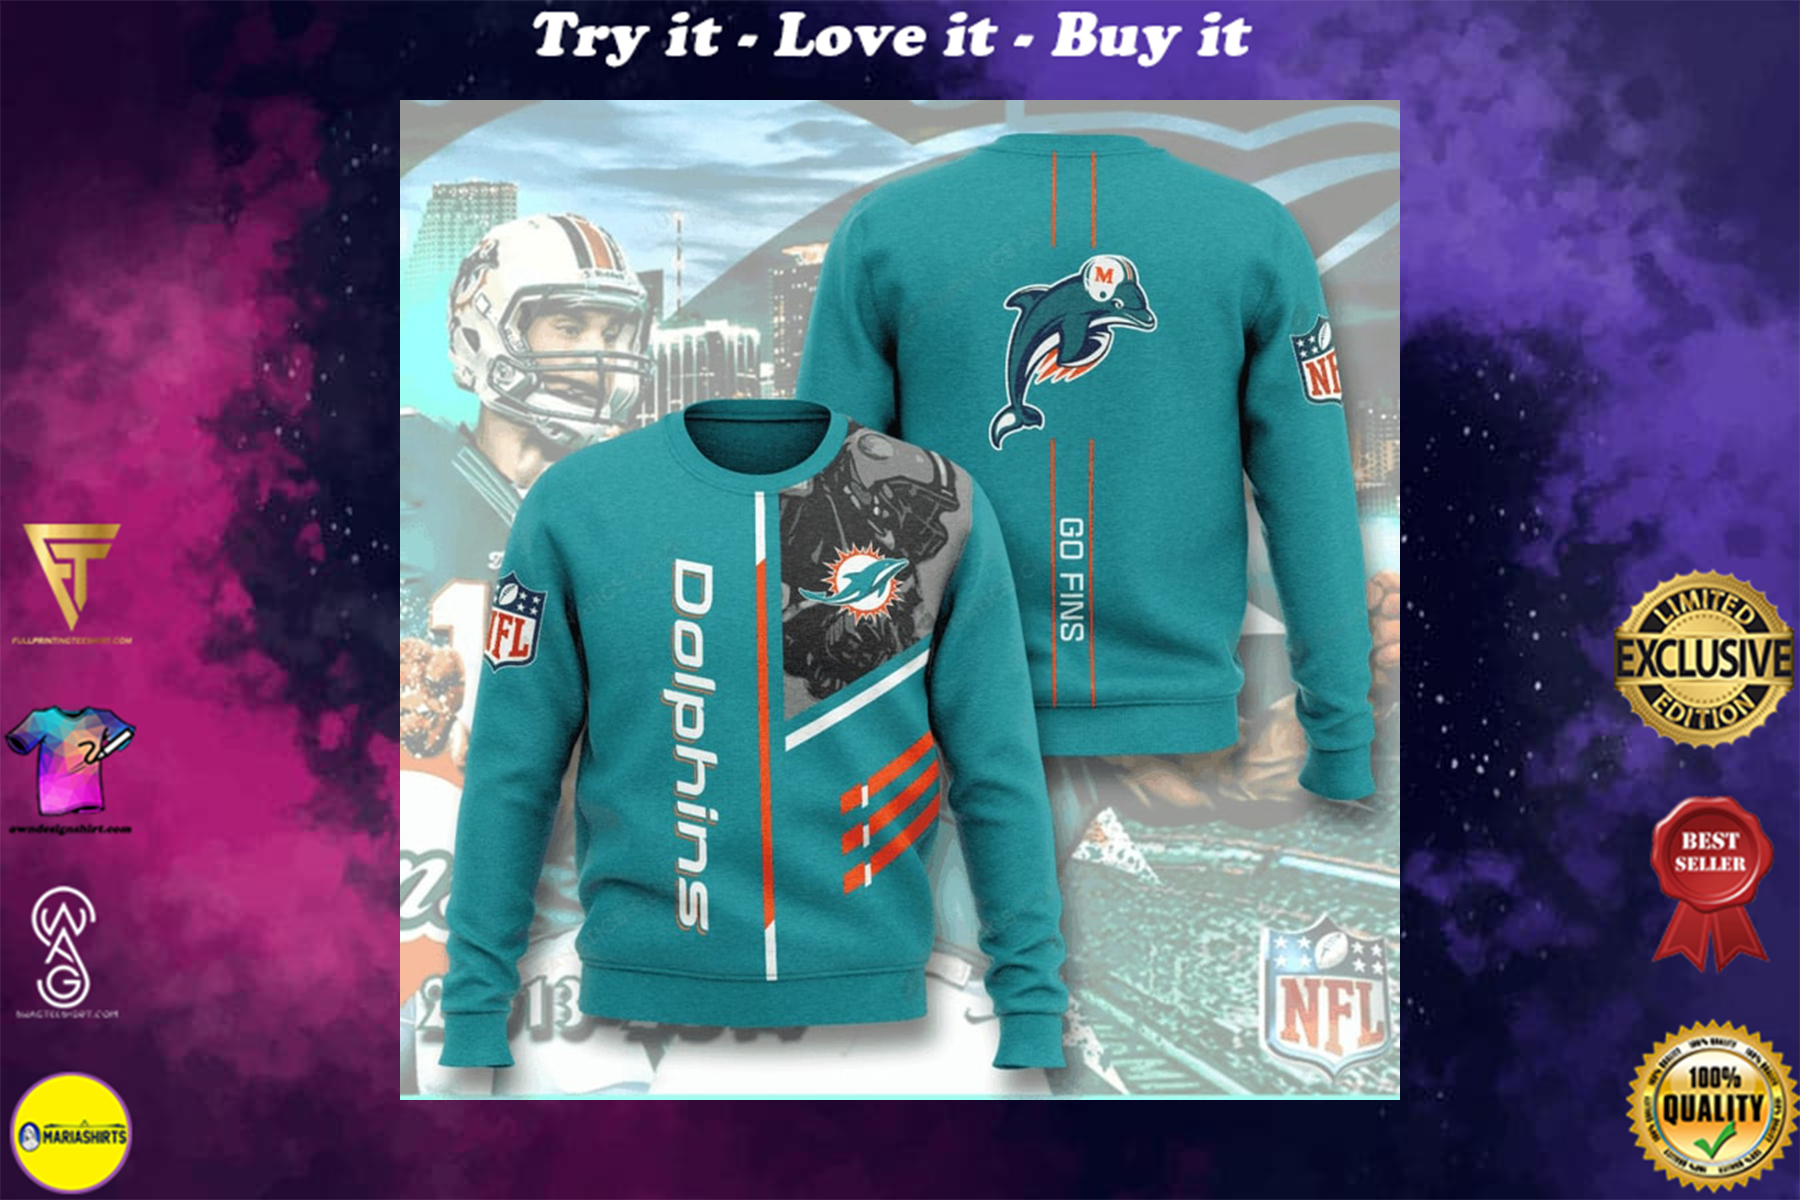 national football league miami dolphins go fins full printing ugly sweater